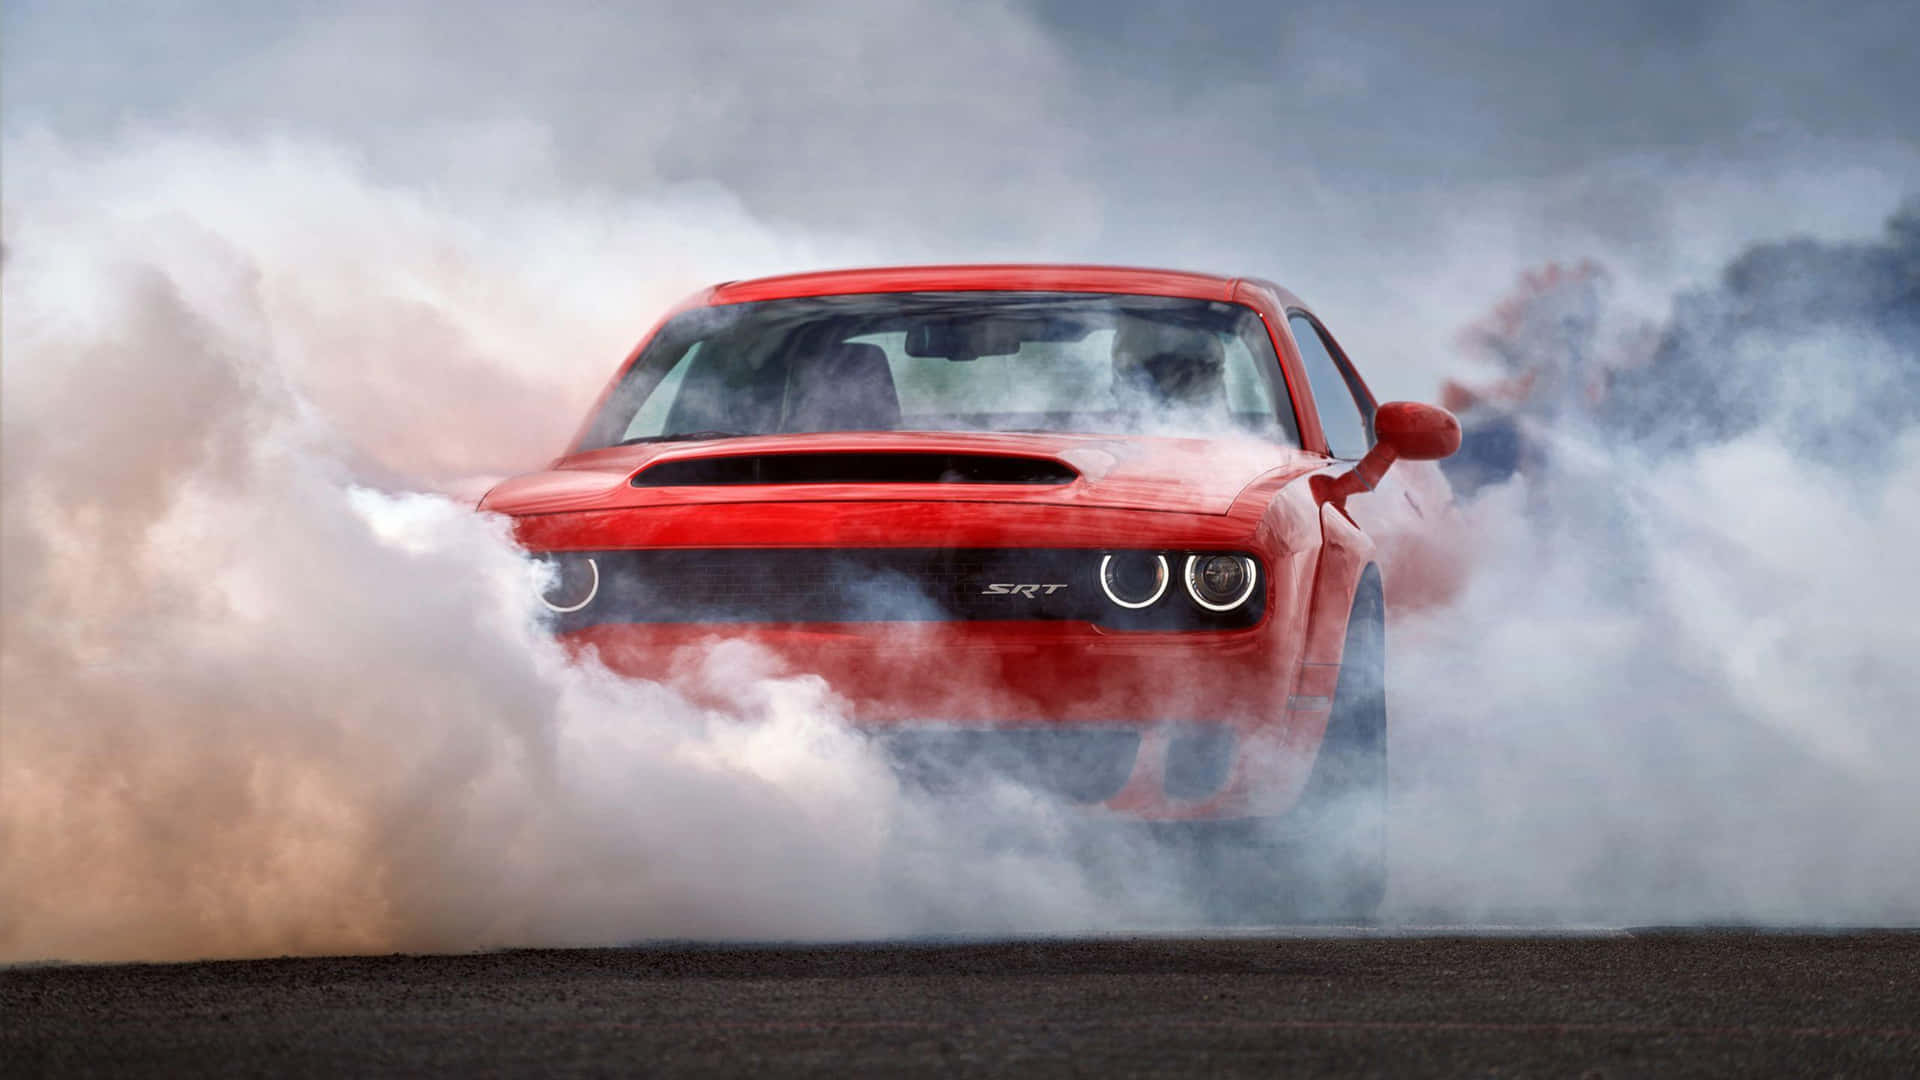 Red Sports Car Burning Rubber Wallpaper